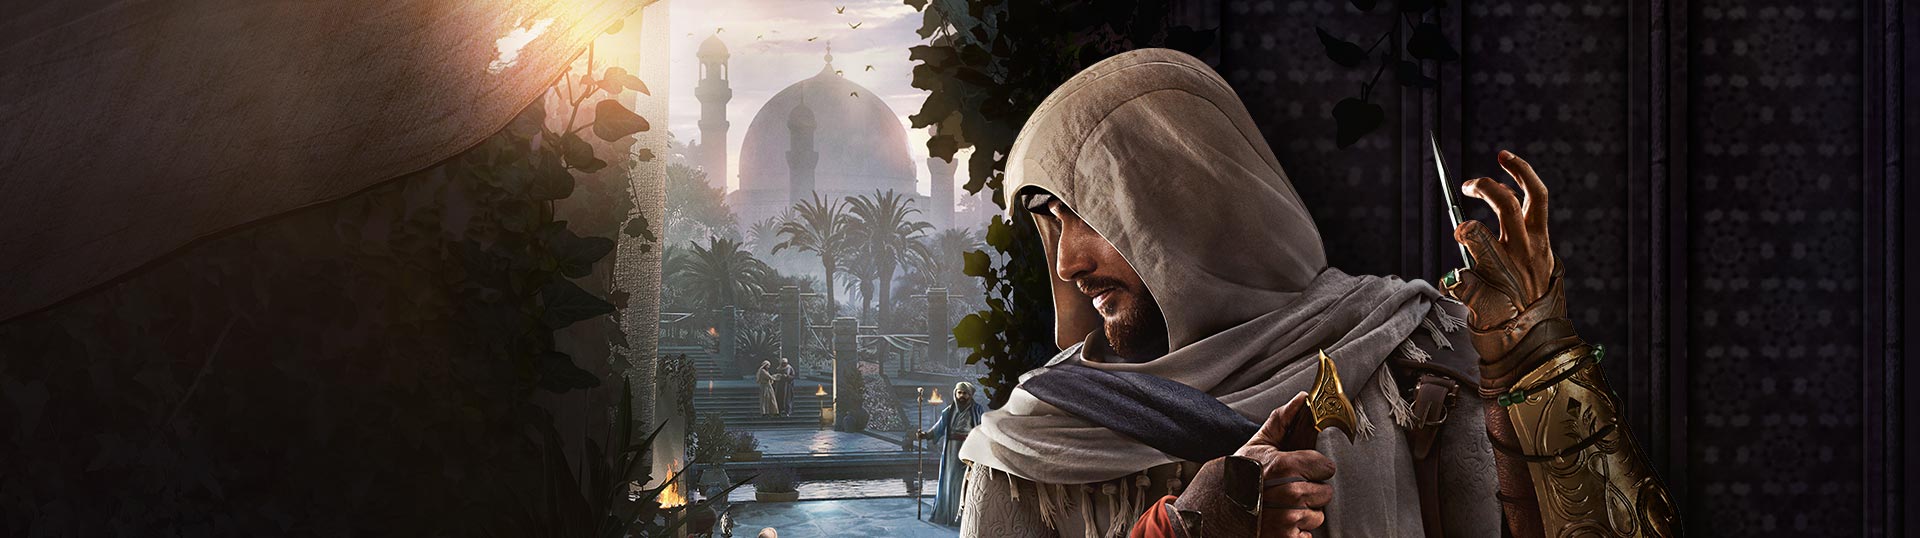 Assassin's Creed Mirage: Story Trailer